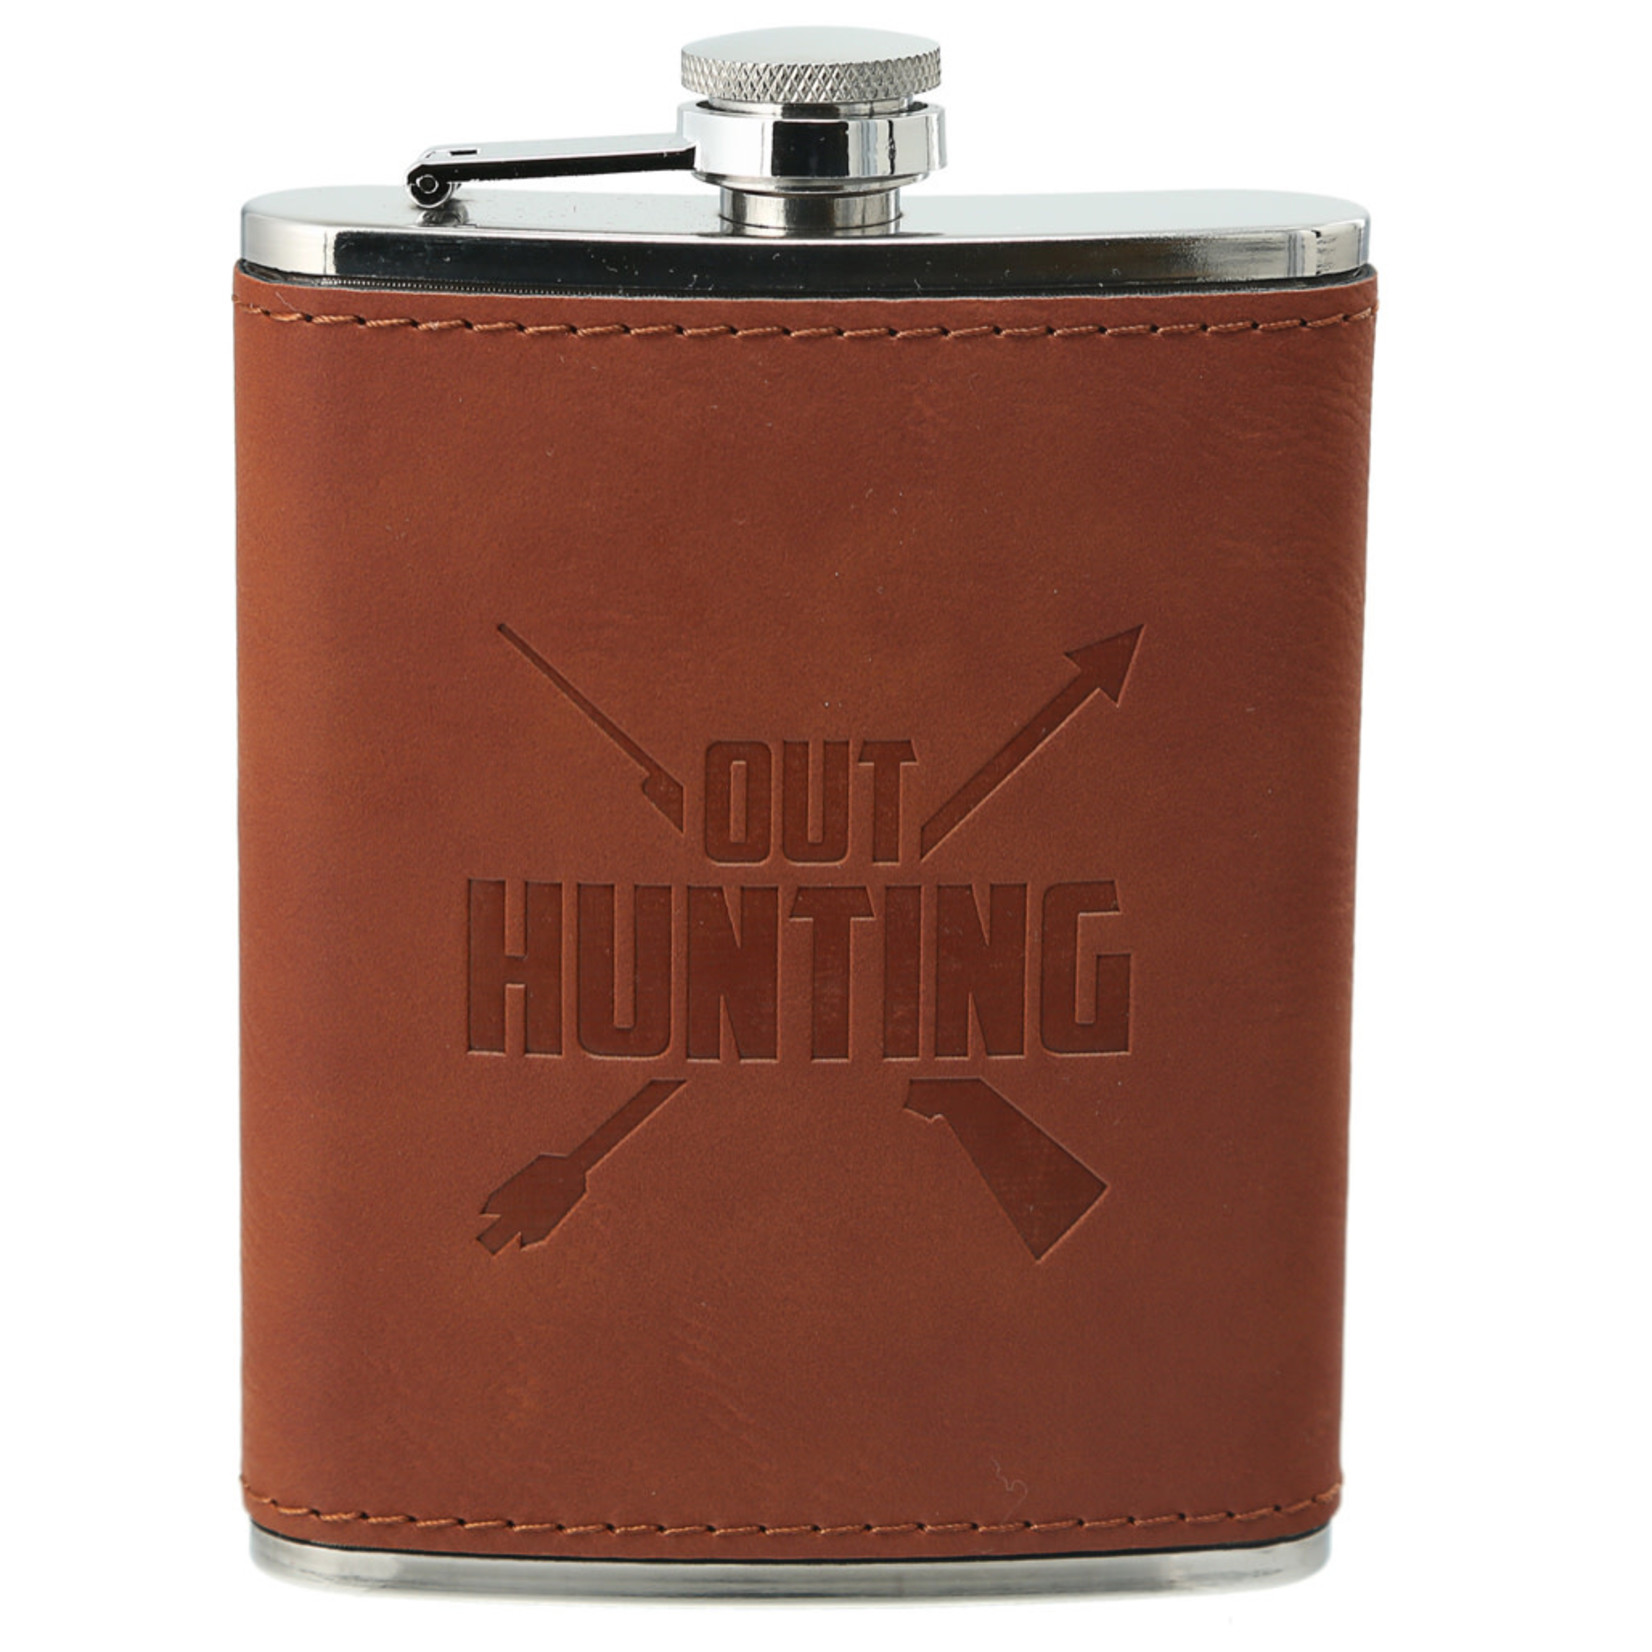 Out Hunting - PU Leather & Stainless Steel Flask